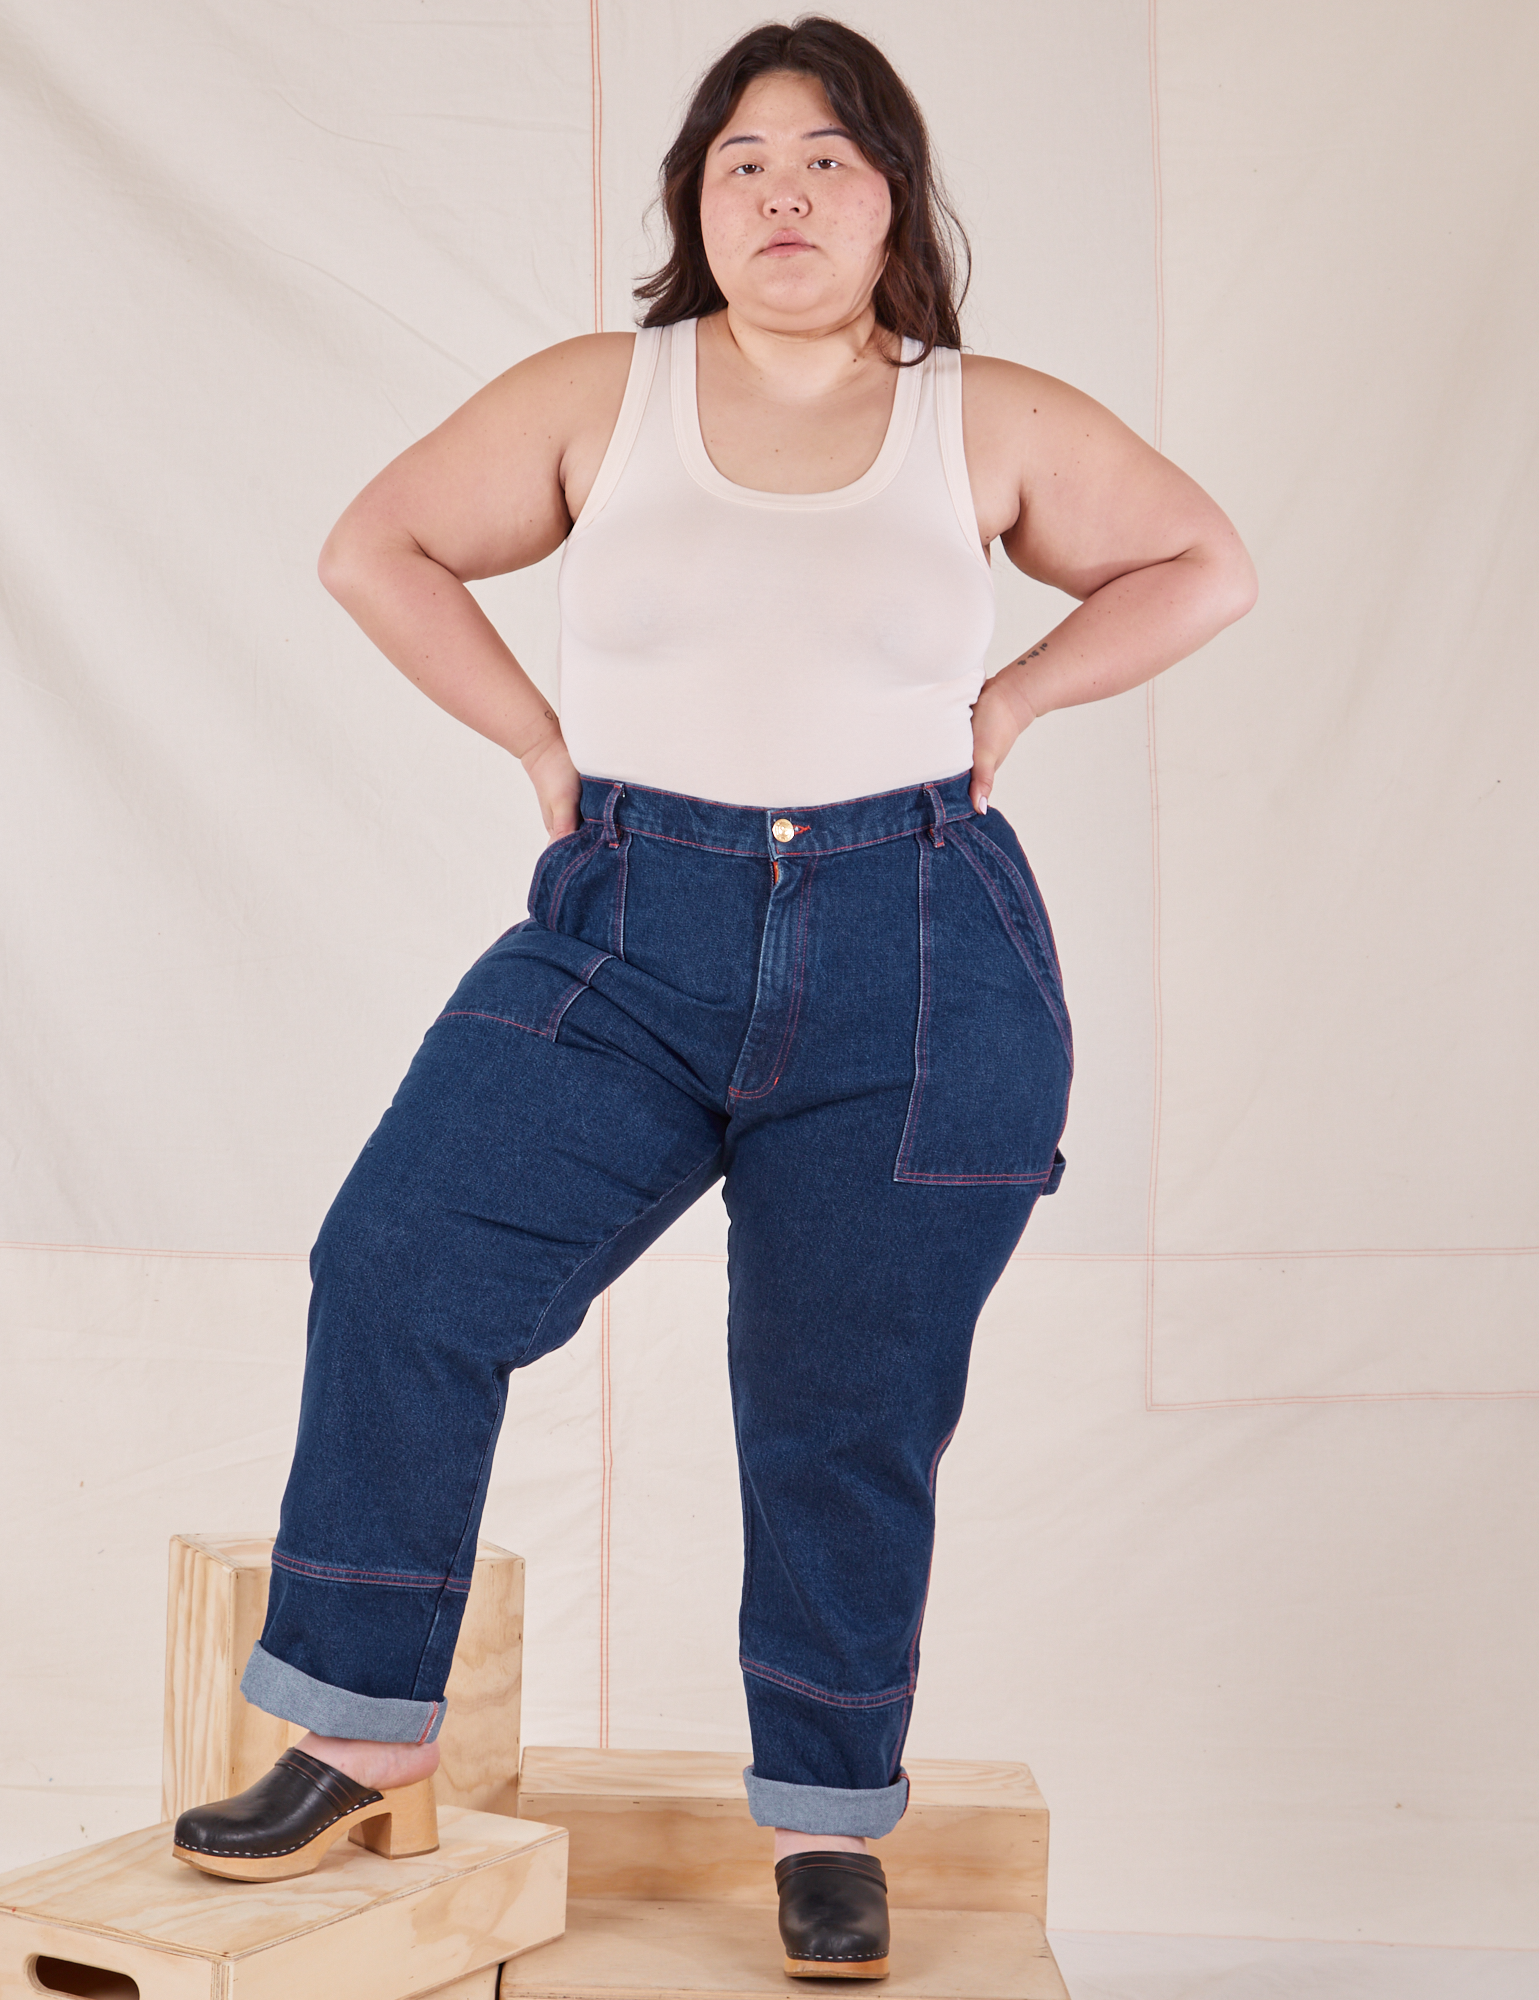 Ashley is 5&#39;7&quot; and wearing 1XL Carpenter Jeans in Dark Wash paired with Tank Top in vintage tee off-white